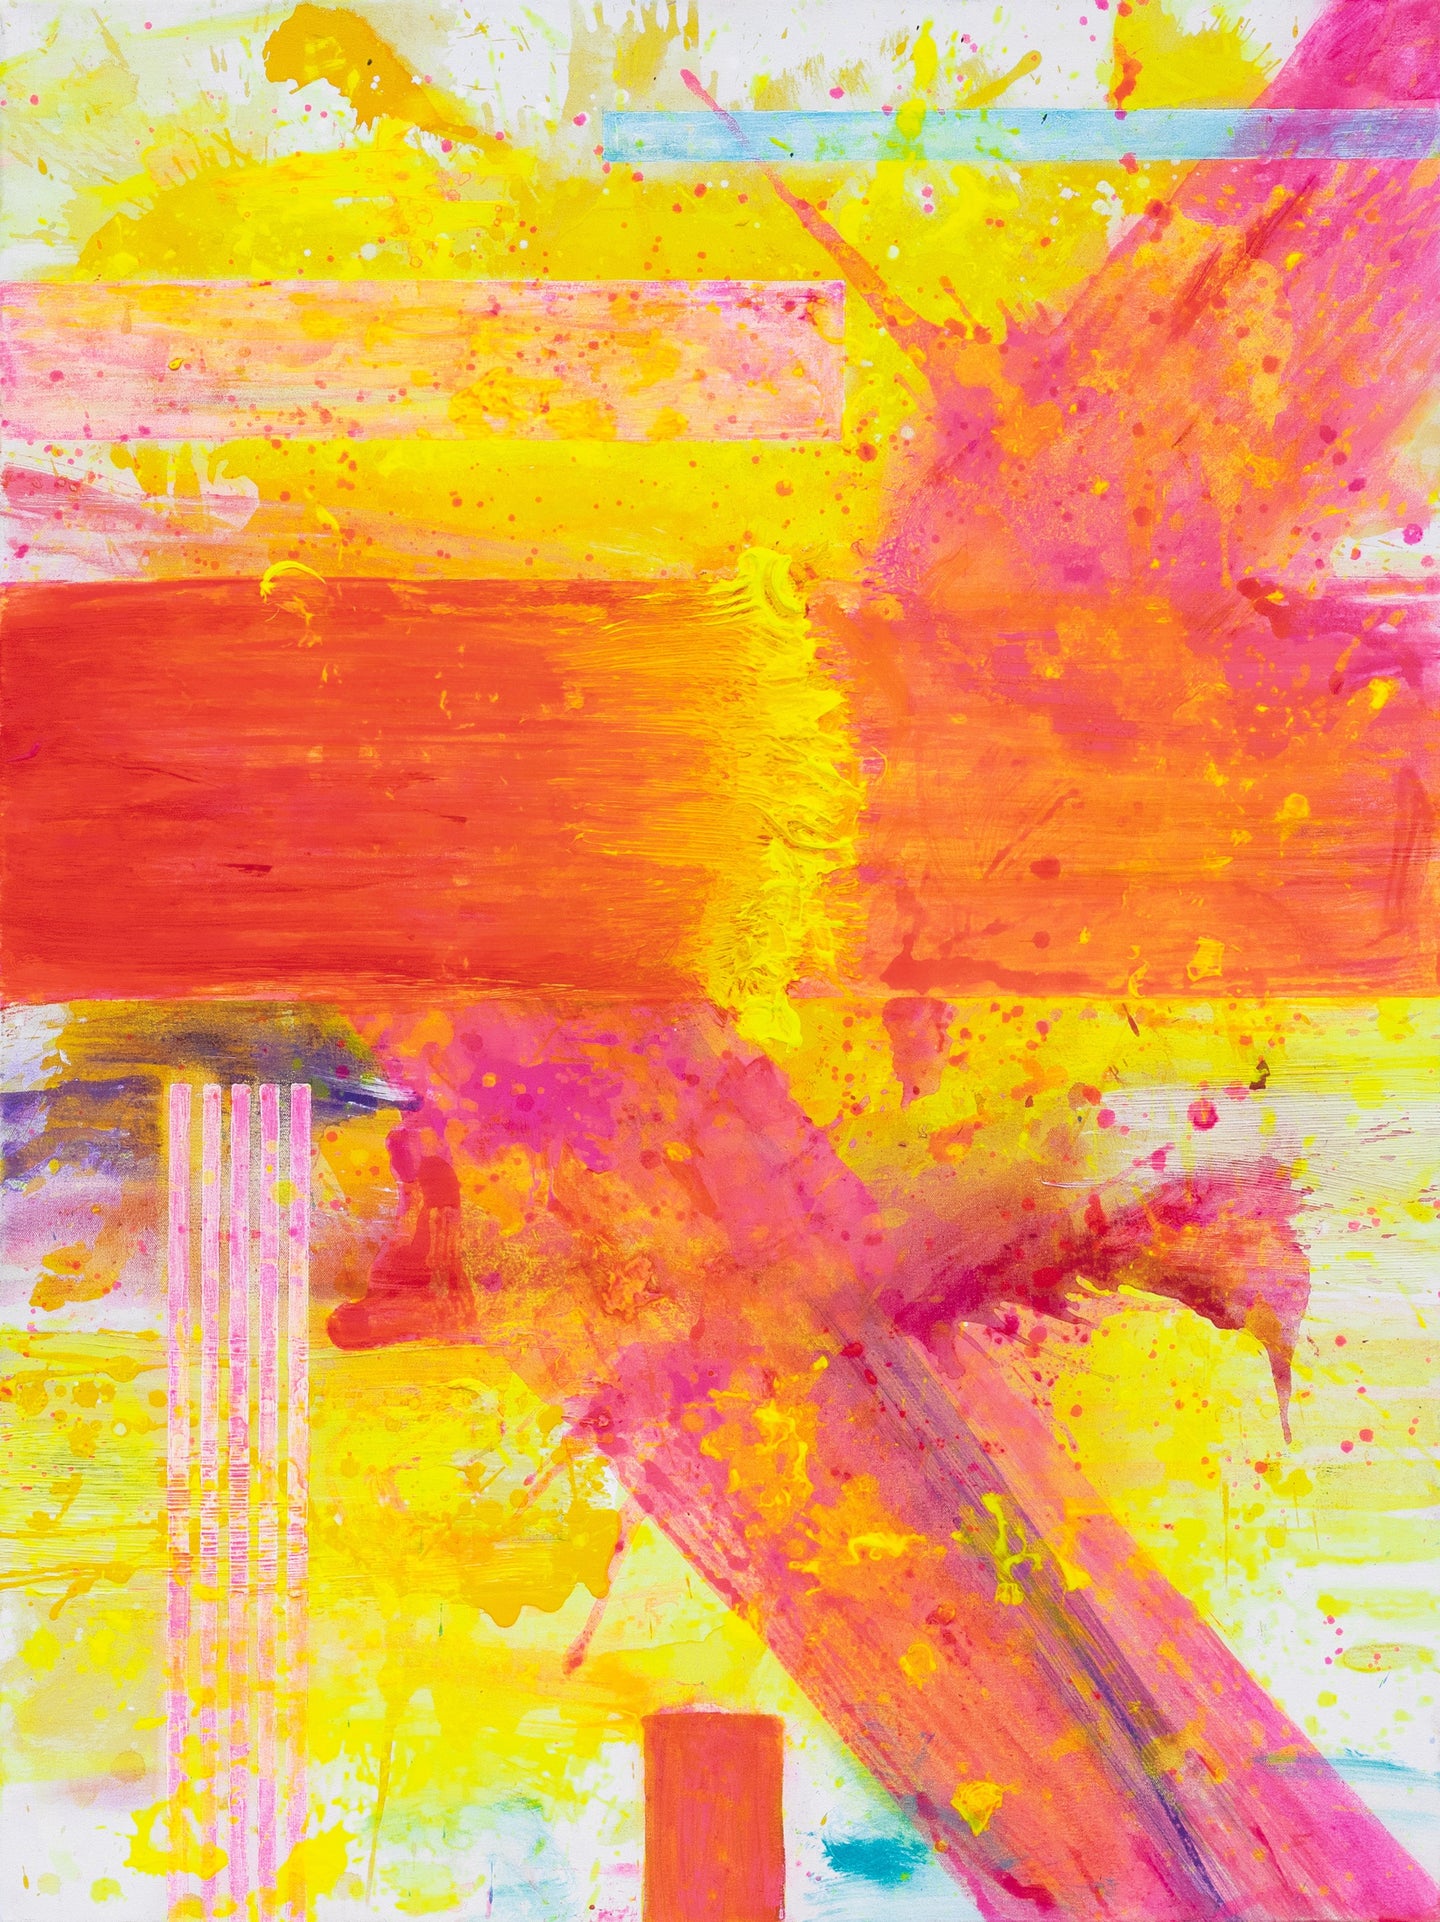 J. Steven Manolis, Palm Beach Light Sunrise without Symbology, Acrylic painting on canvas, 2019, 48 x 36 inches, pink, yellow, orange, Gestural Abstraction, Abstract expressionism art for sale at Manolis Projects Art Gallery, Miami, Fl